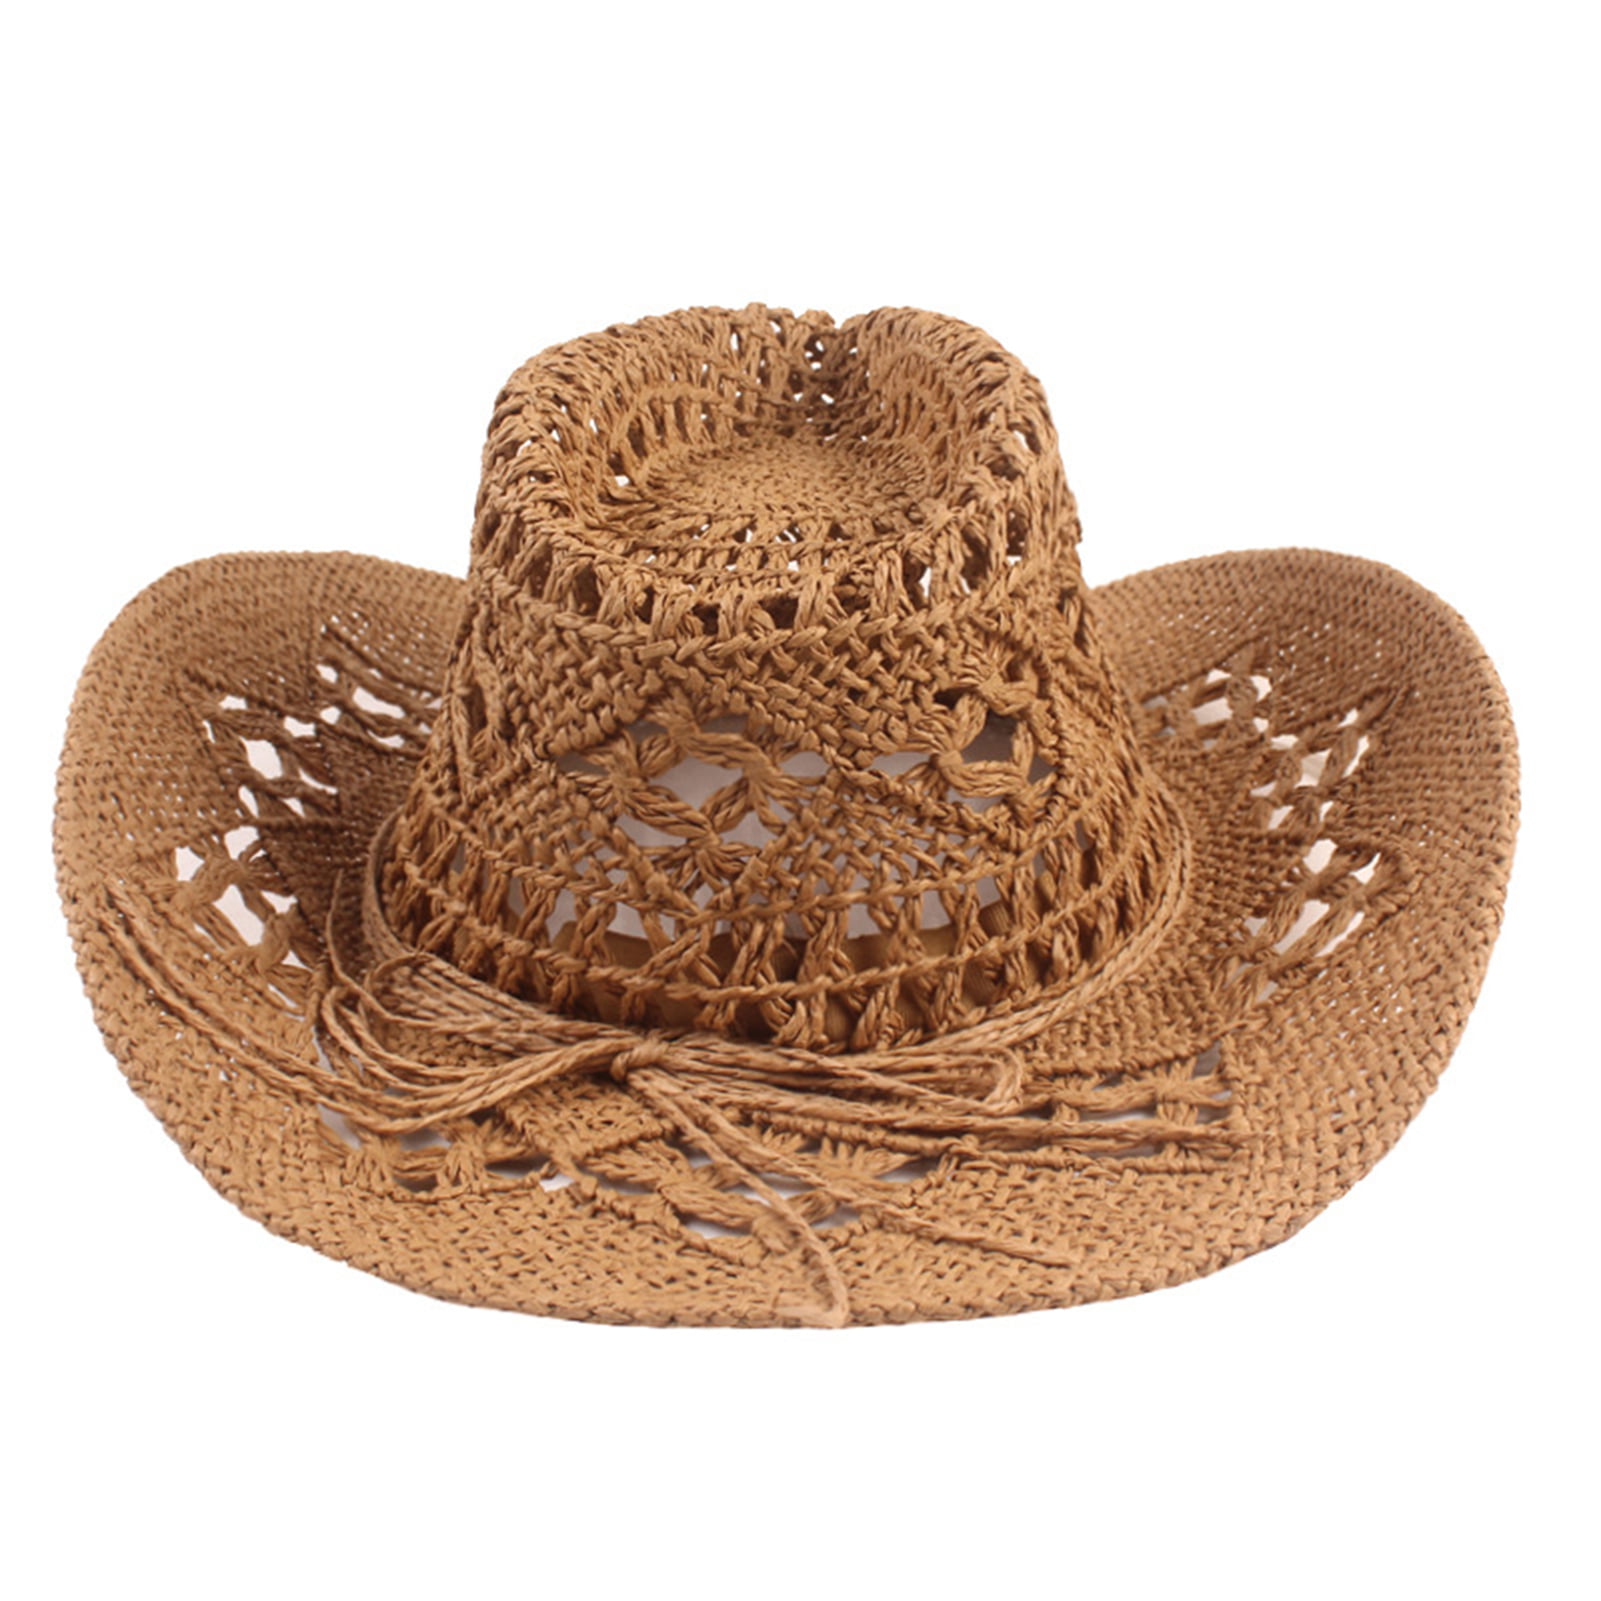 12 Pcs Straw Cowboy Hats for Women Men, Wide Brim Summer Hat Bulk Panama  Sun Protection Hats for Western Themed Party Travel Decorations Brown